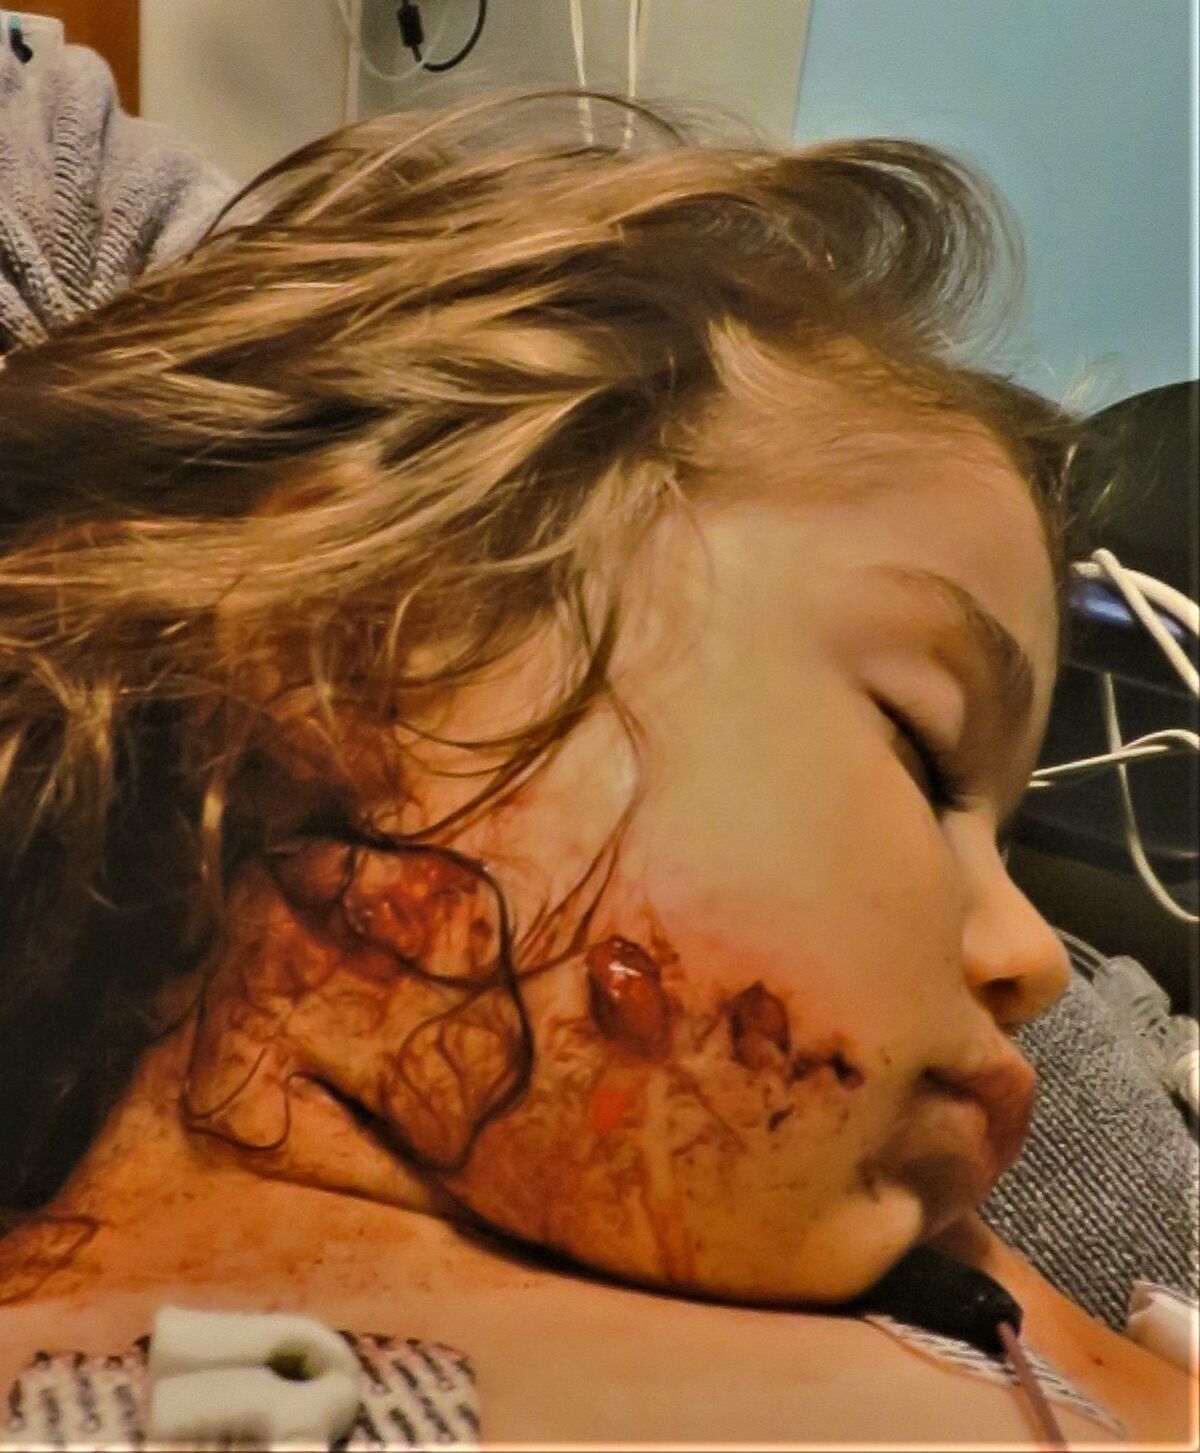 A photo showing a bloody wound to a young girl's face